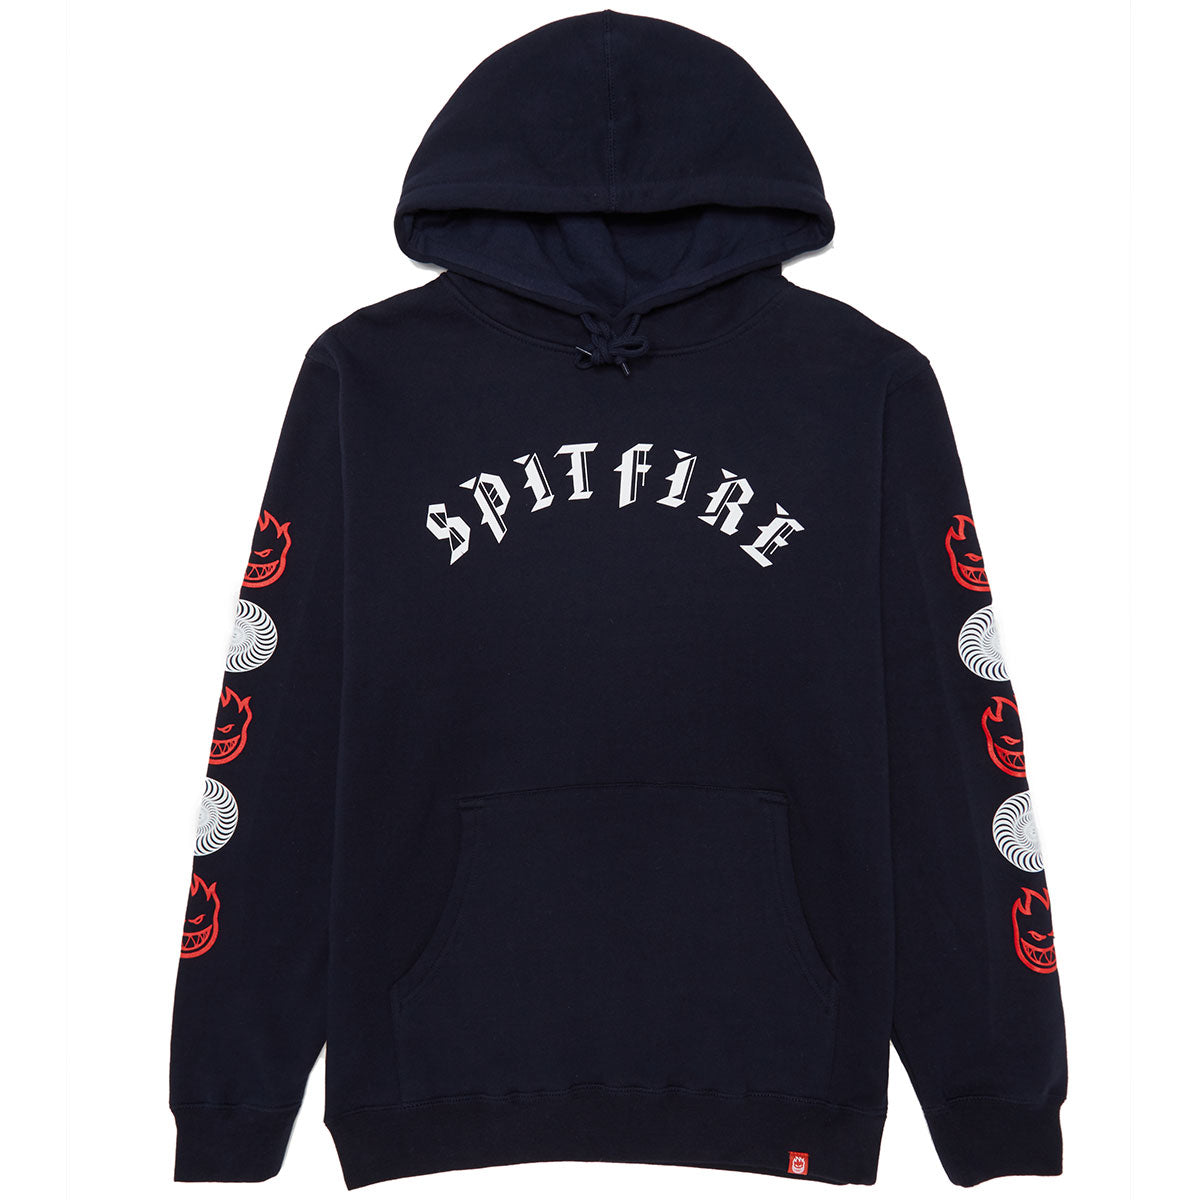 Spitfire Old E Combo Sleeve Hoodie - Navy/White/Red image 1